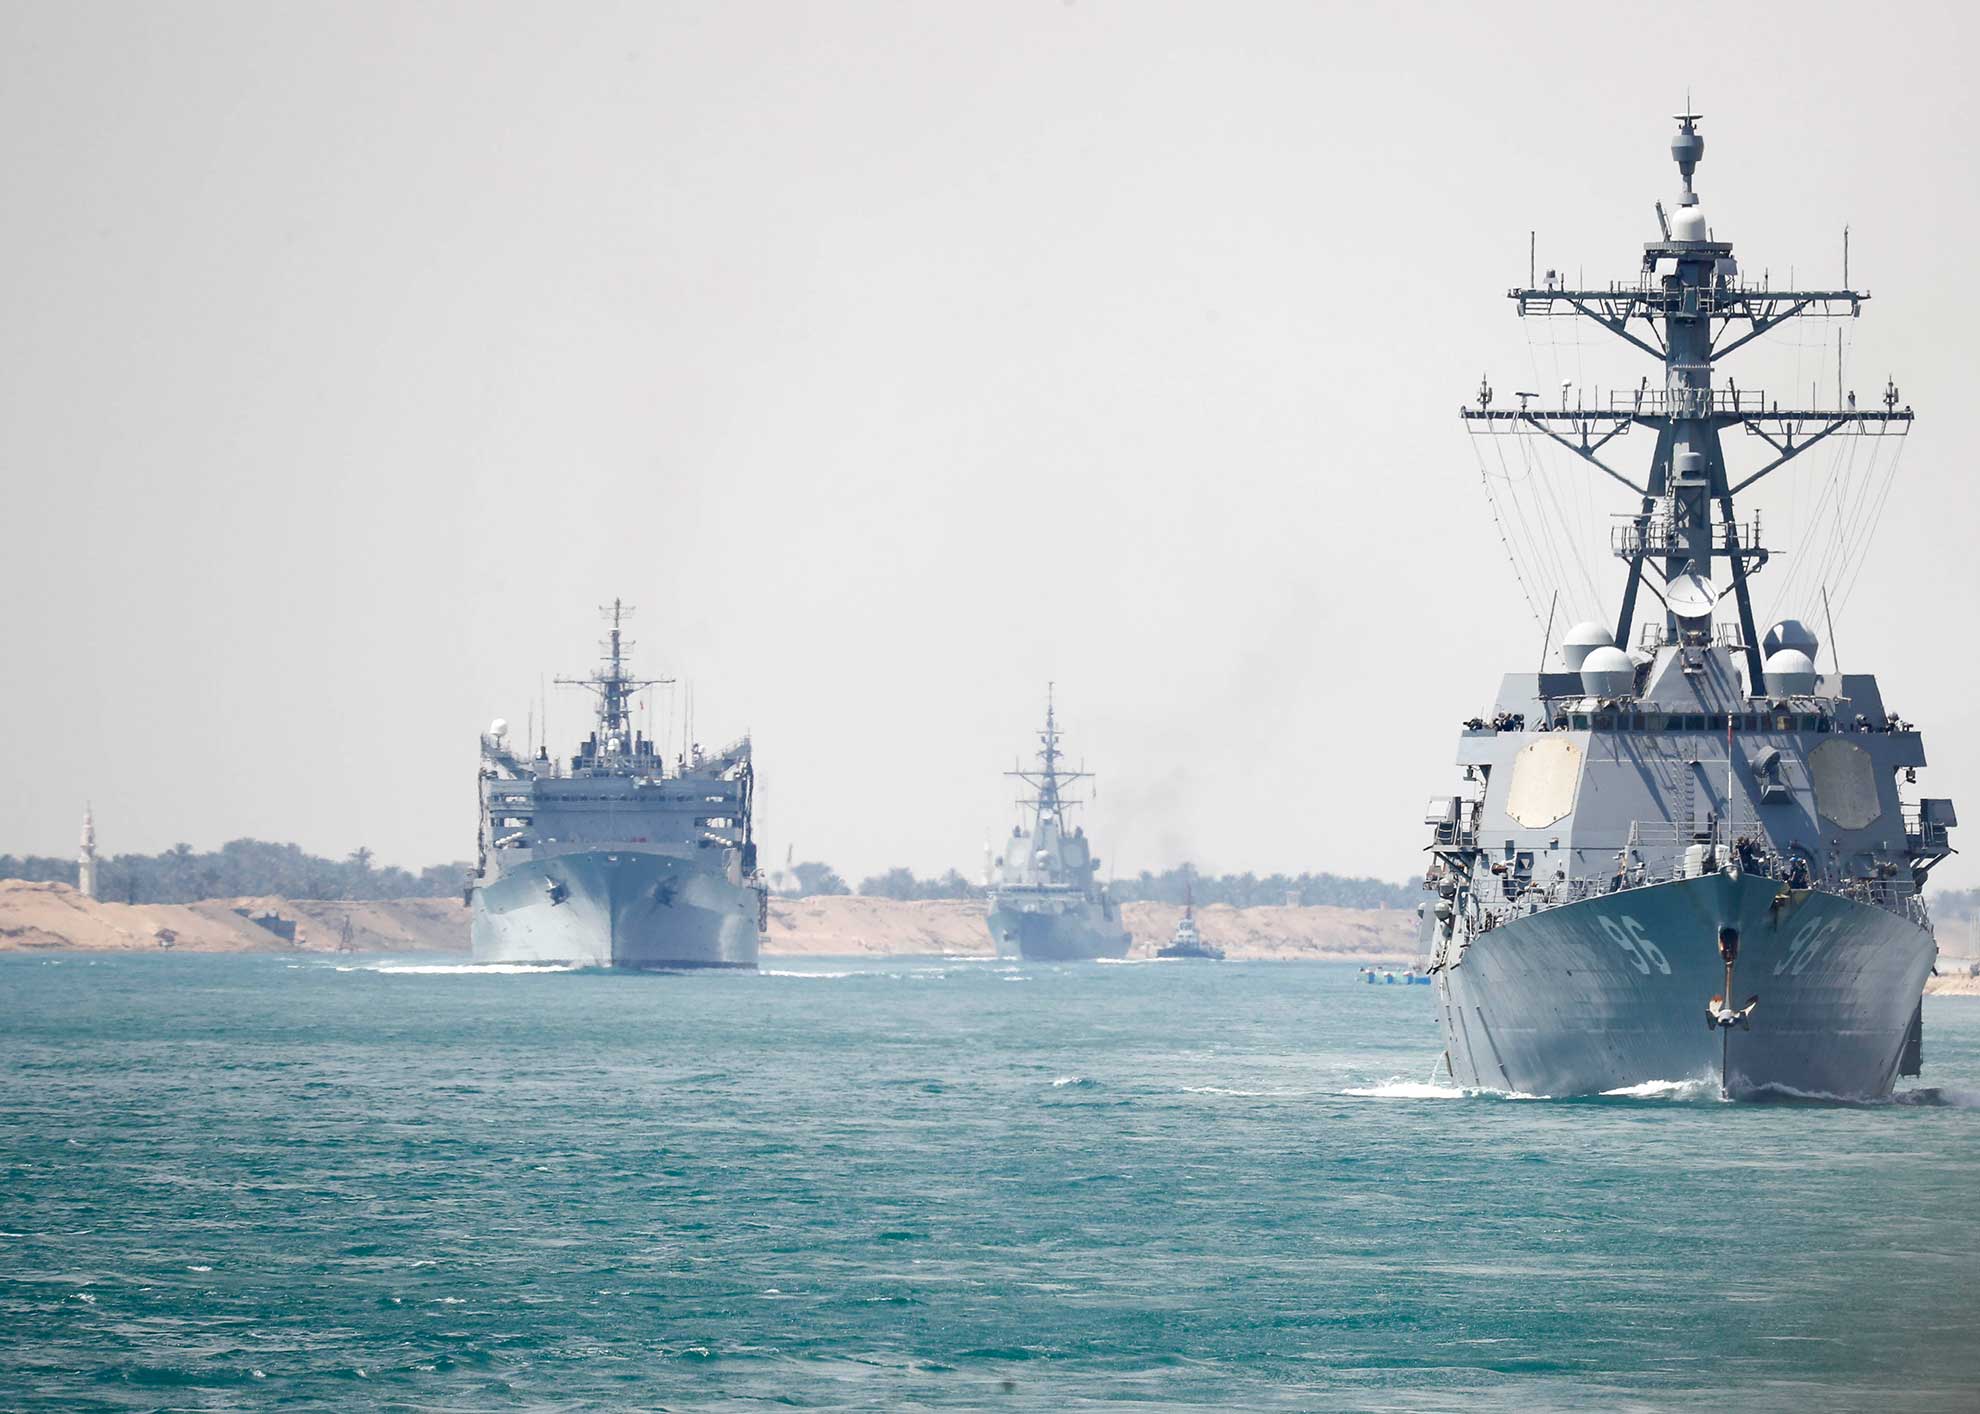 Suez Canal (May 9, 2019) The Abraham Lincoln Carrier Strike Group transits the Suez Canal. The Abraham Lincoln Carrier Strike Group (ABECSG) is deployed to the U.S. Central Command area of responsibility in order to defend American forces and interests in the region. With Abraham Lincoln as the flagship, deployed strike group assets include staffs, ships and aircraft of Carrier Strike Group 12 (CSG 12), Destroyer Squadron 2 (DESRON 2), USS Leyte Gulf (CG 55) and Carrier Air Wing 7 (CVW 7); as well as the Spanish navy lvaro de Bazan-class frigate ESPS Mendez Nñez (F 104) -- U.S. Navy photo by MCS 3rd Class Darion Chanelle Triplett. -